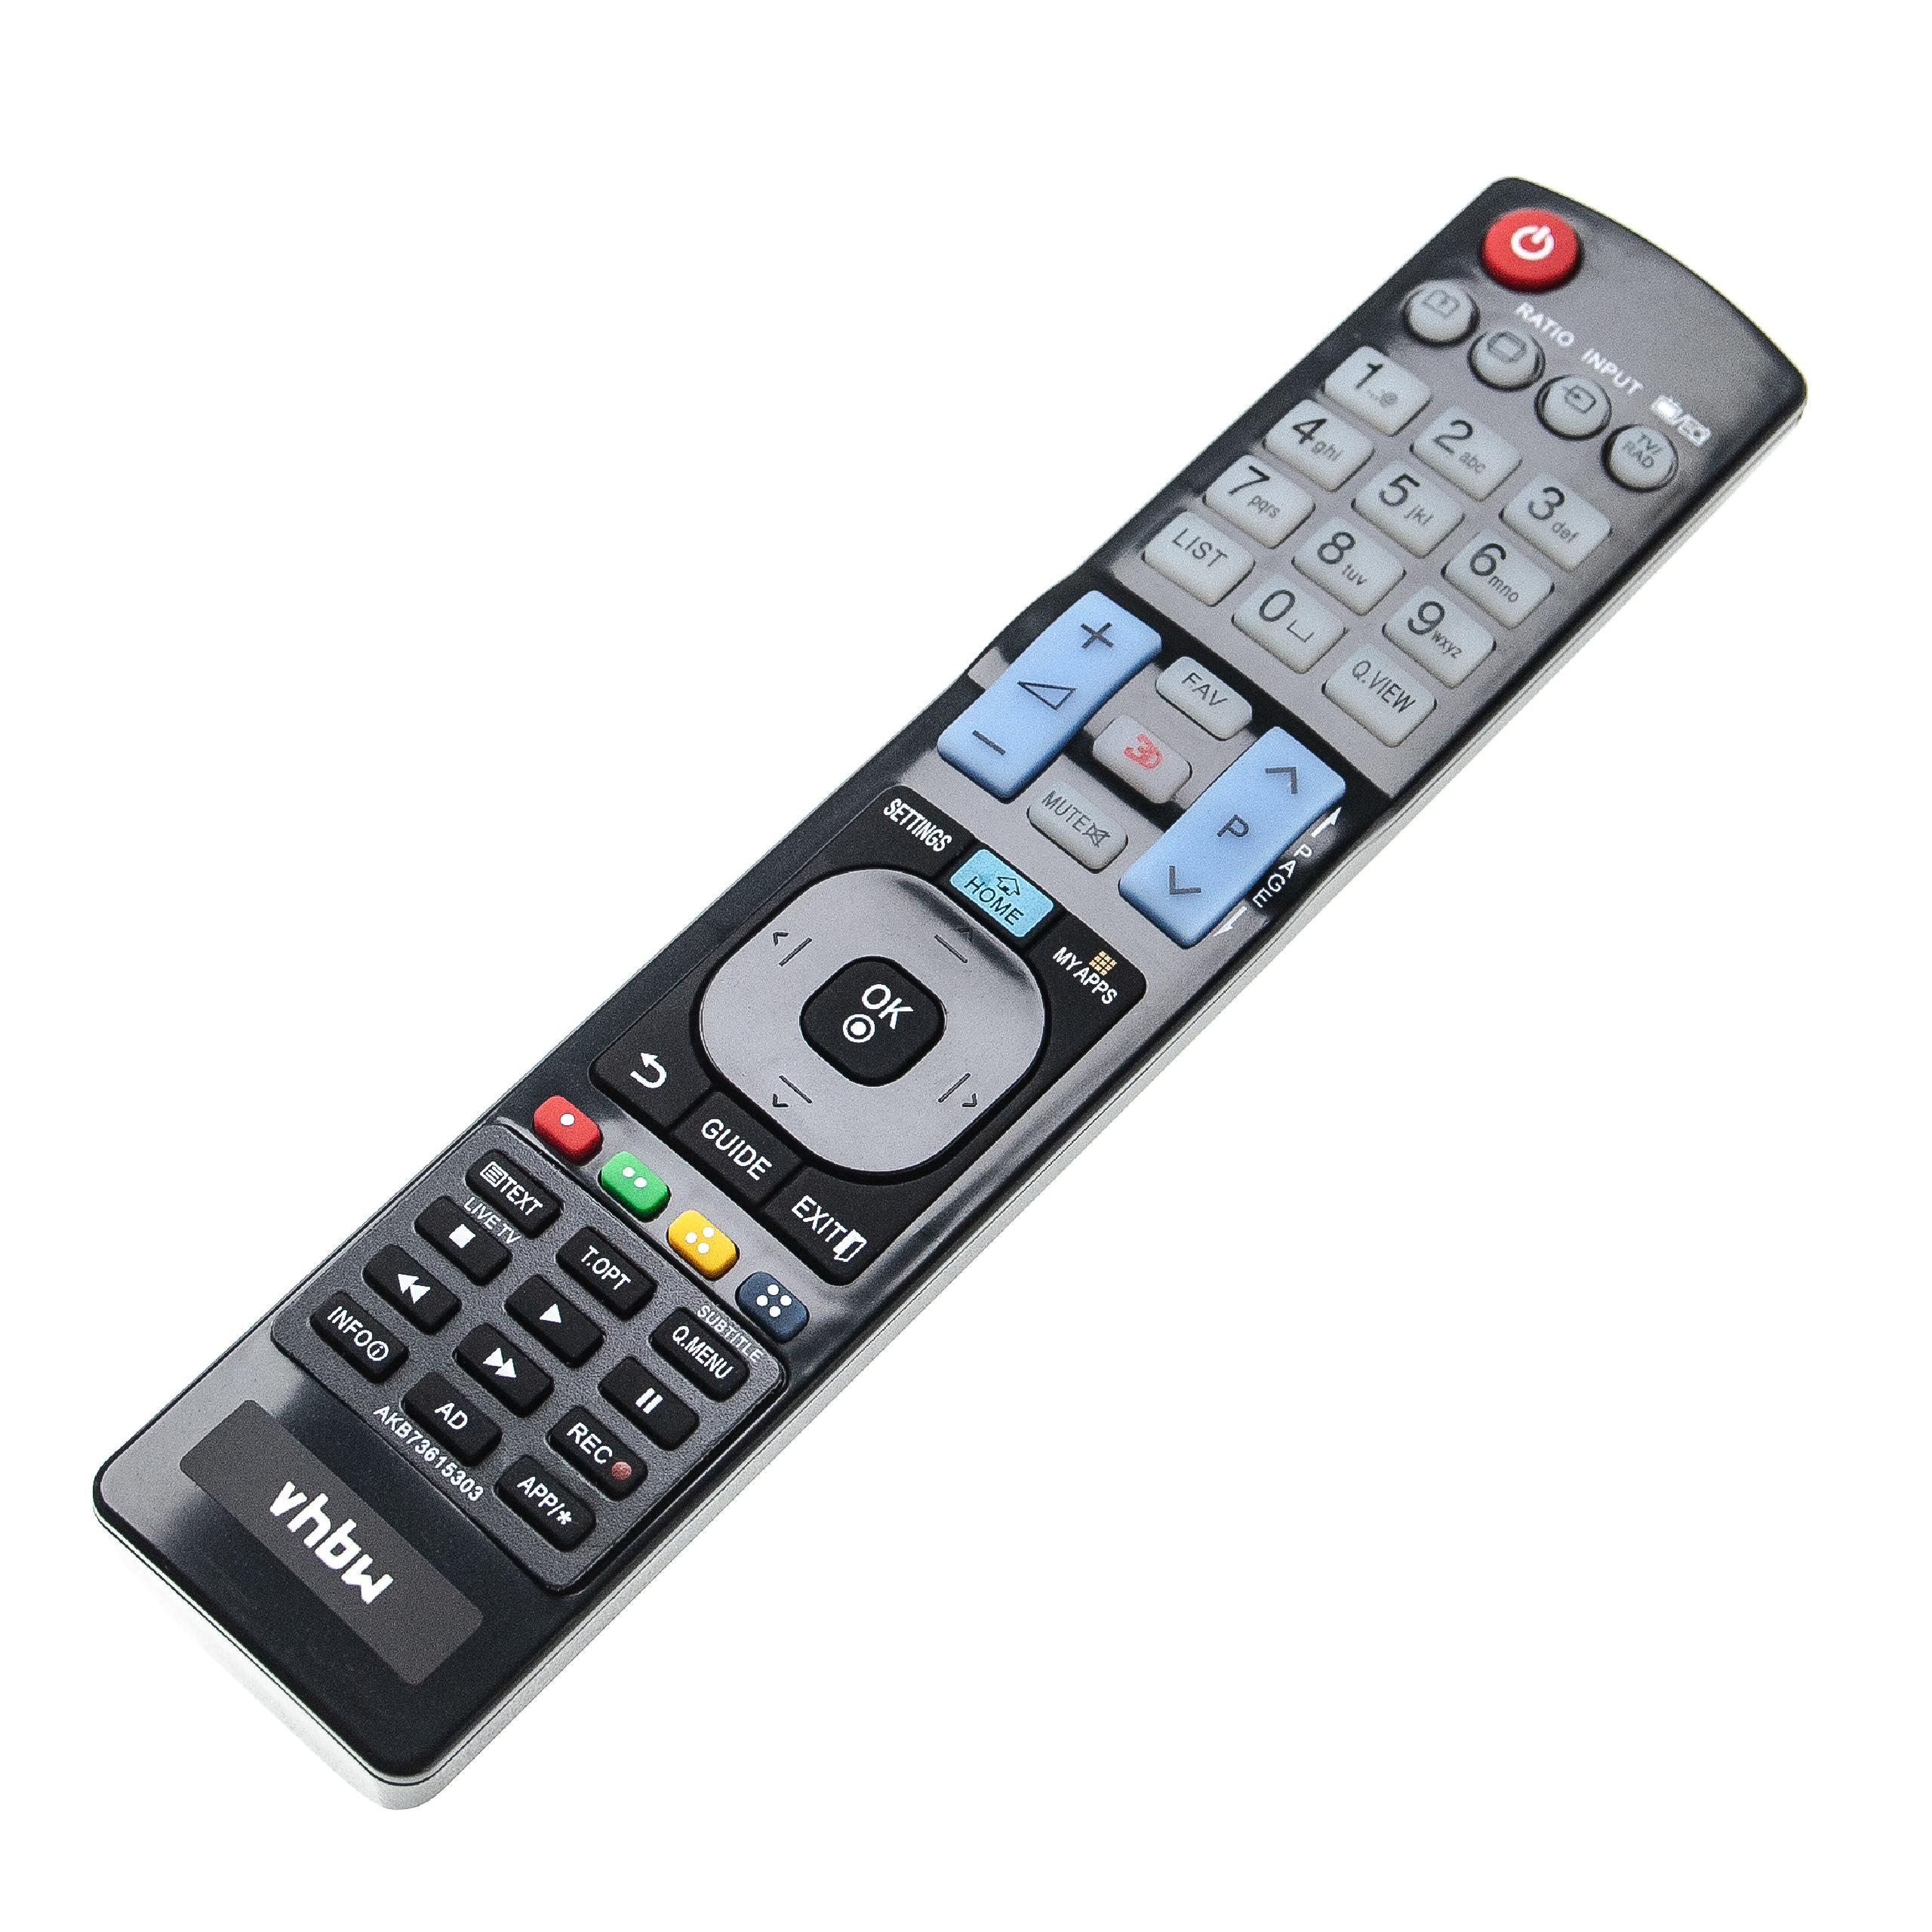 Remote Control replaces LG AKB73615303, AKB73756580 for LG TV